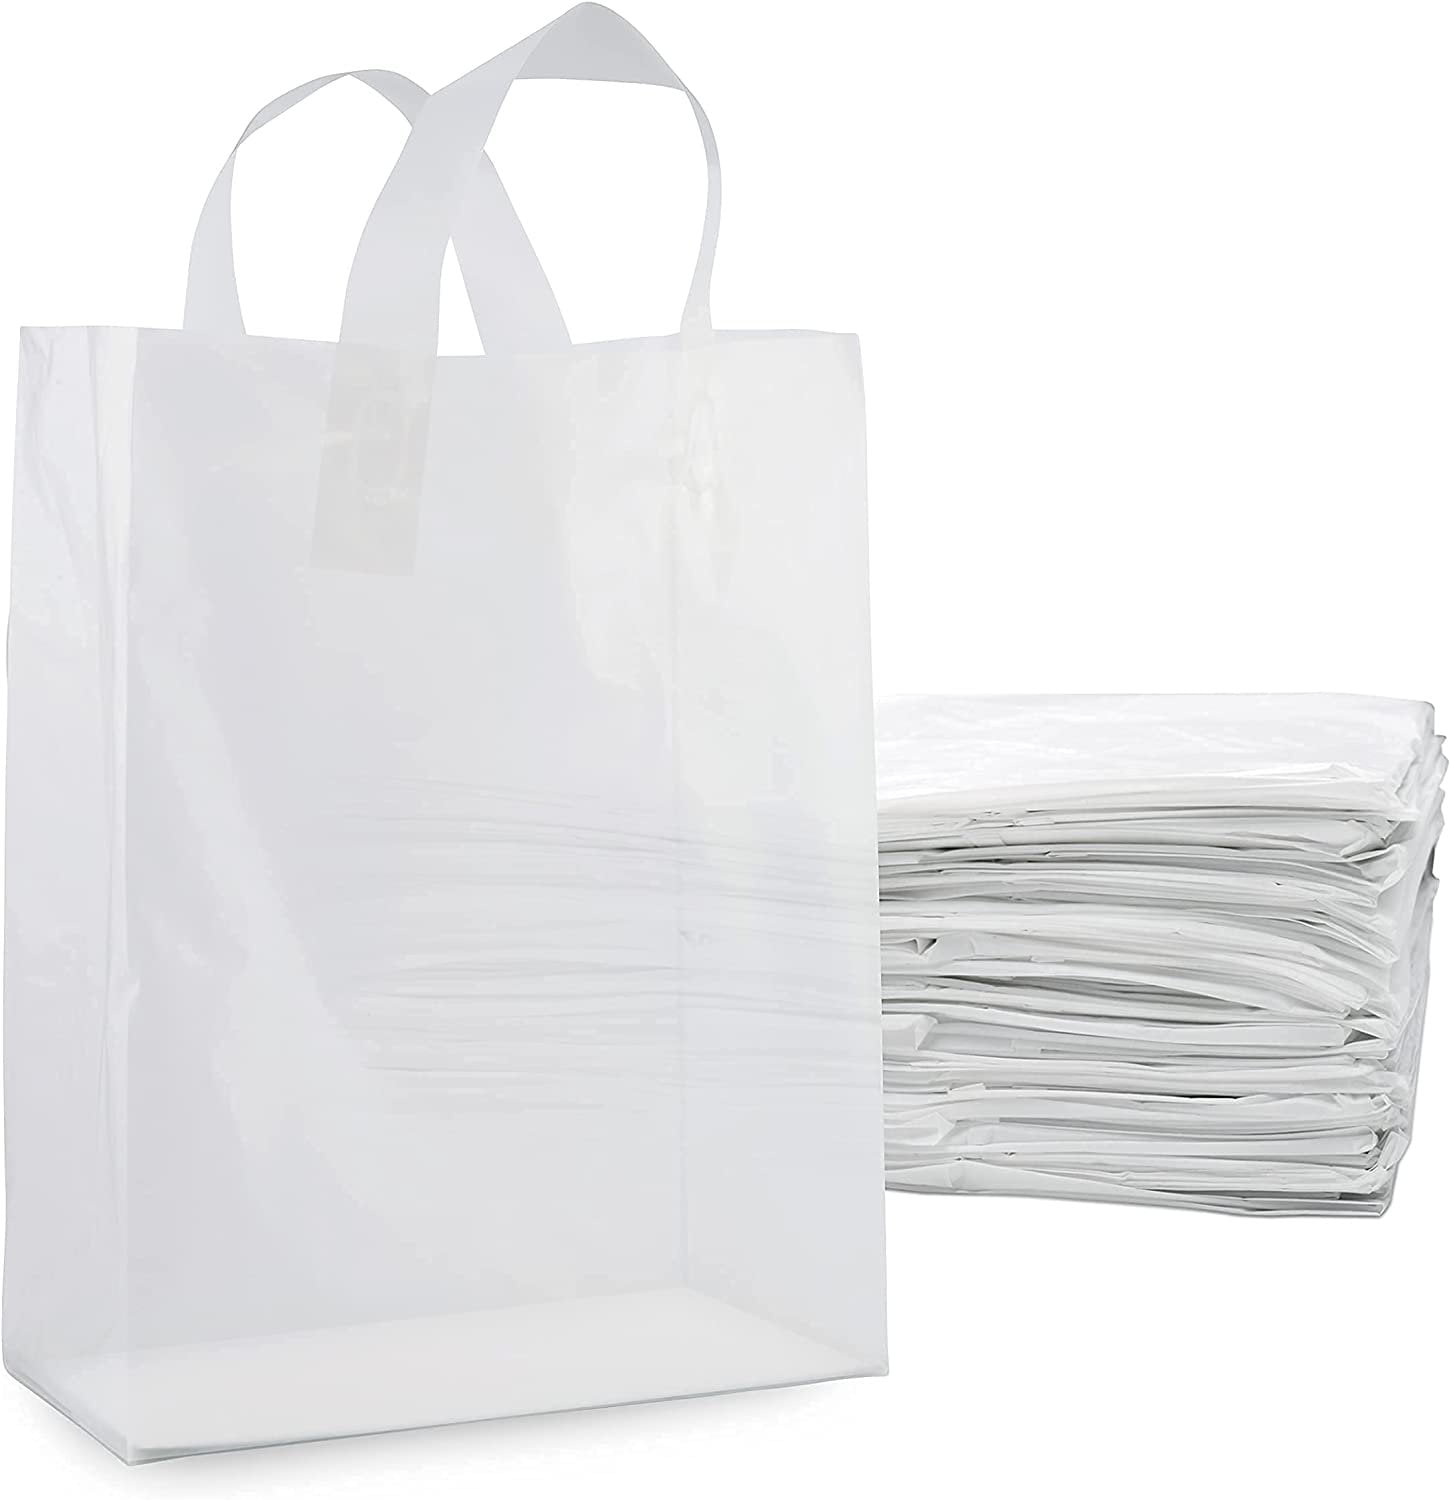 200 Plastic Shopping Bags Retail Merchandise Gift Party Tote LOT Bulk Halloween 